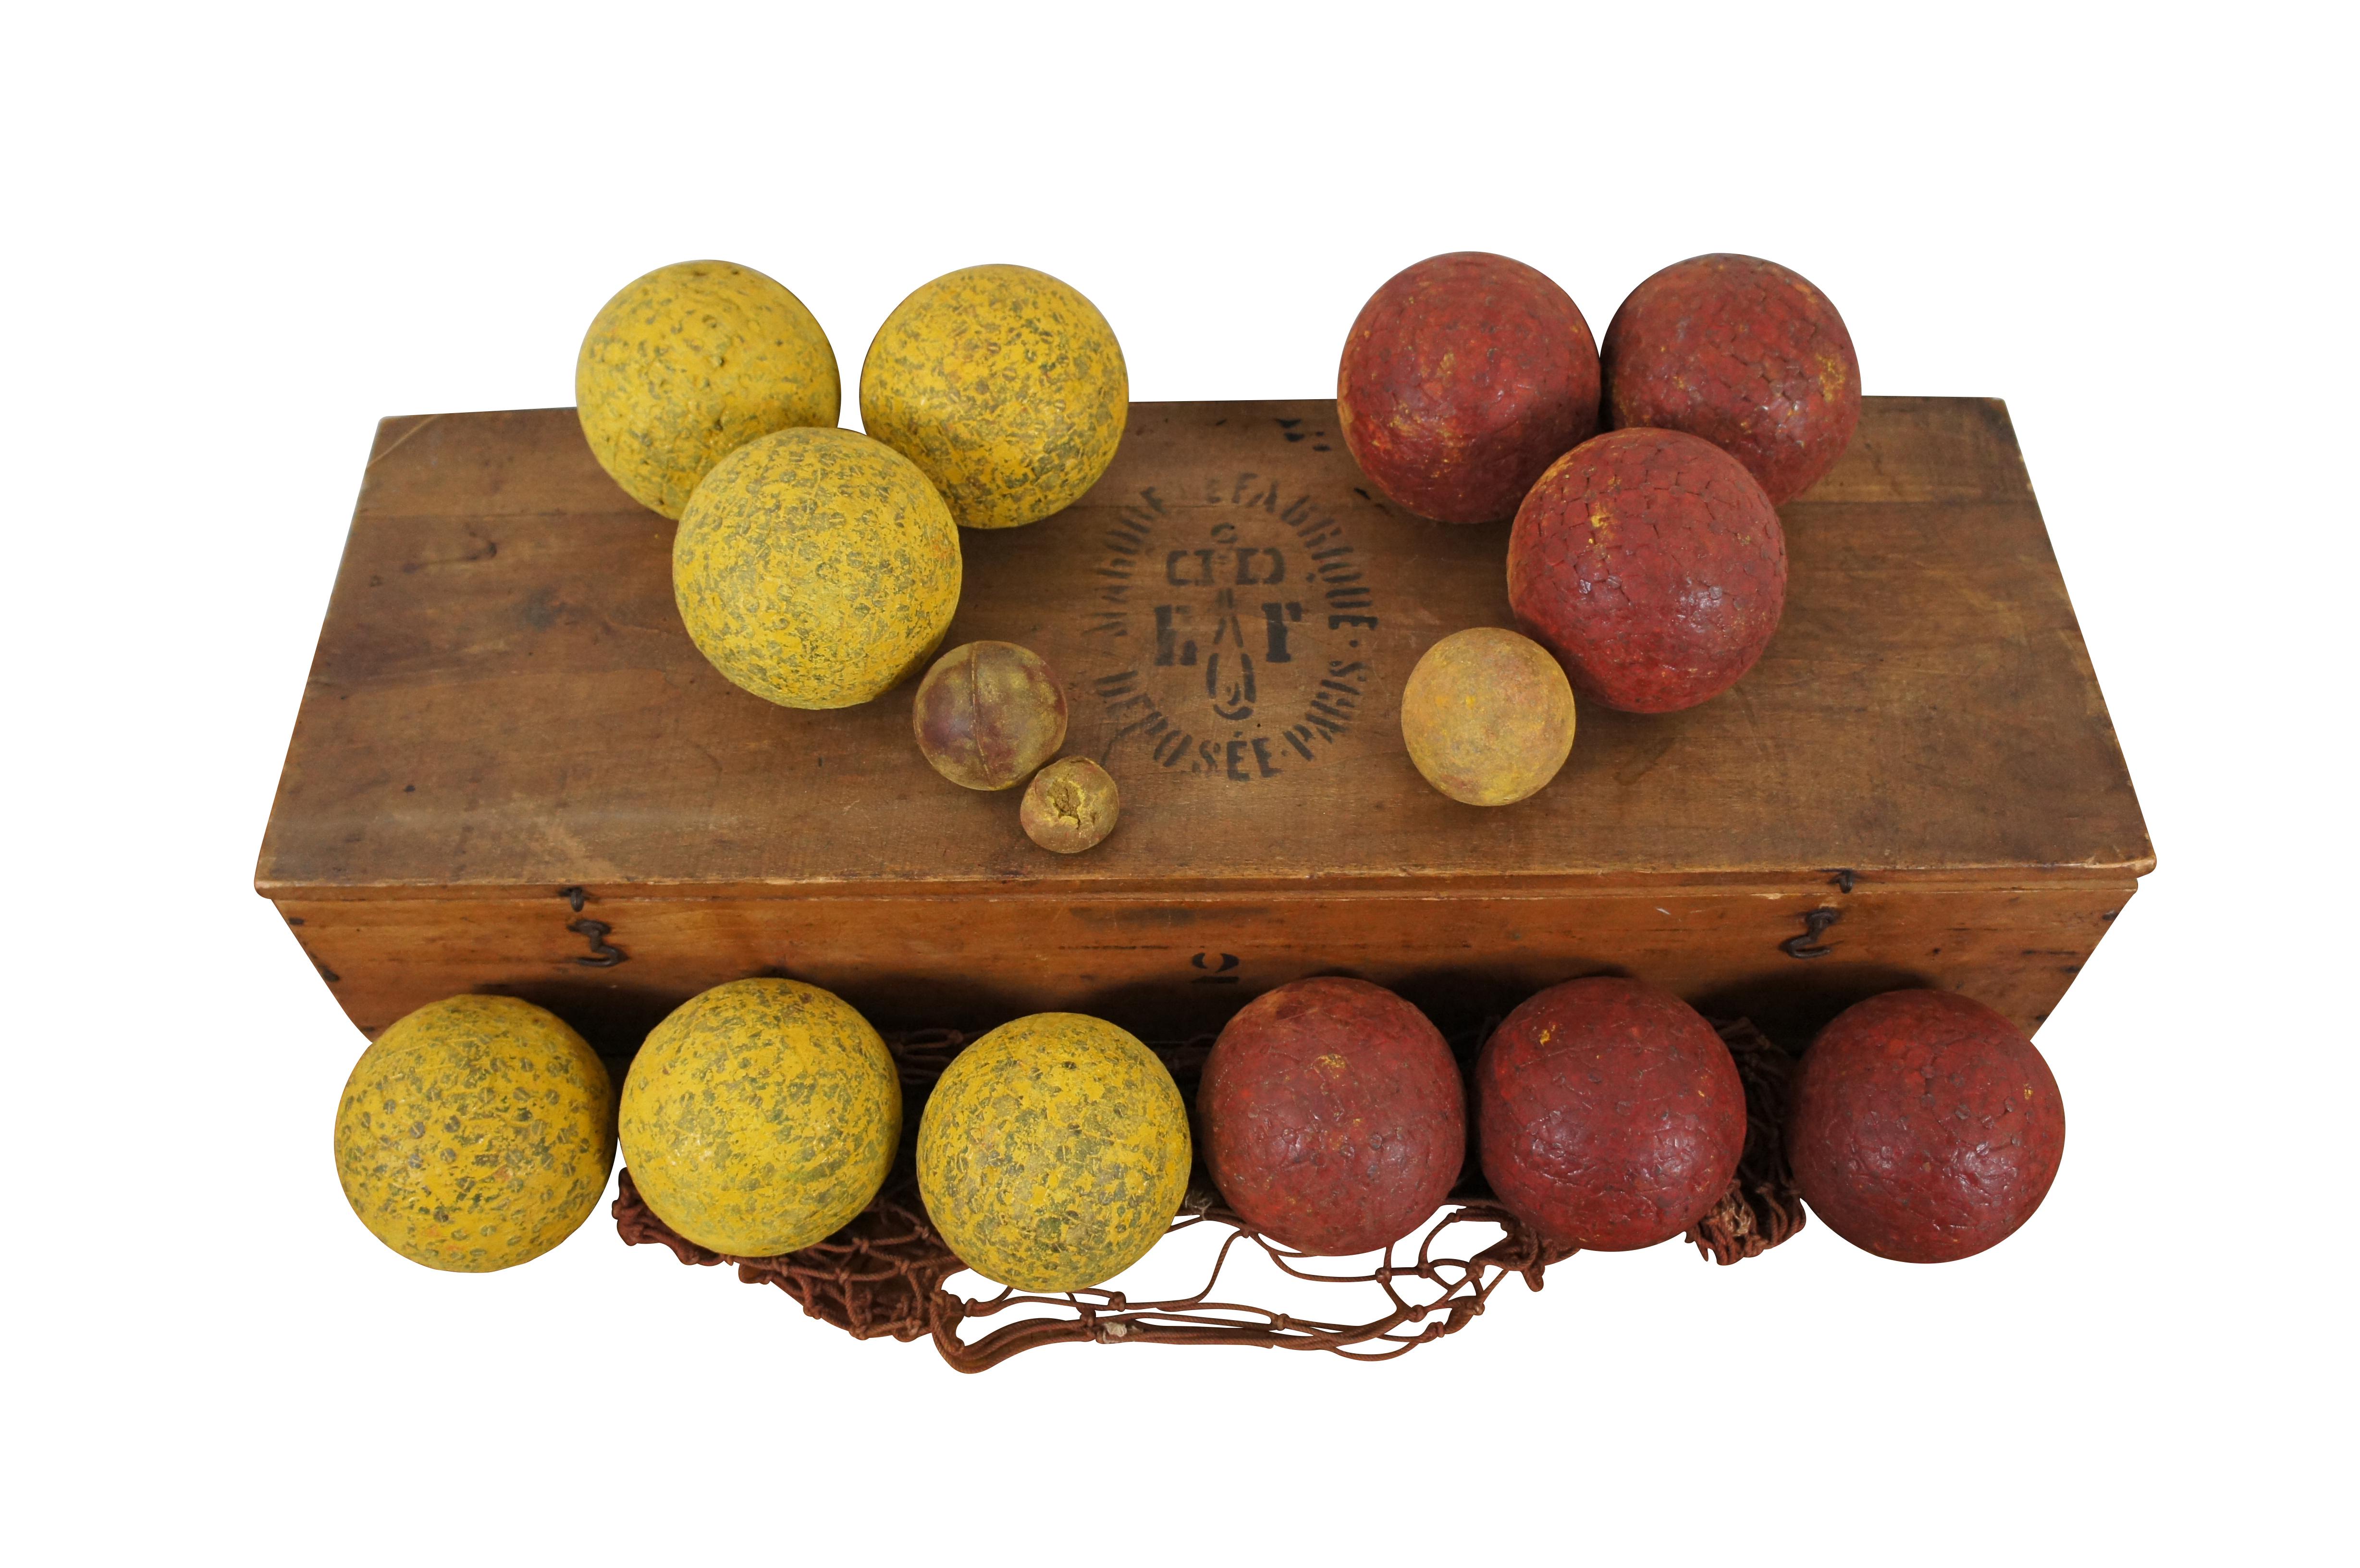 Antique 17 piece Jeu de Boules / lawn bowling / bocce set including original storage crate with instructions and point counter / abicus,12 nail studded playing balls (6 yellow and 6 red), one macrame net bag, and 3 assorted smaller balls for use as